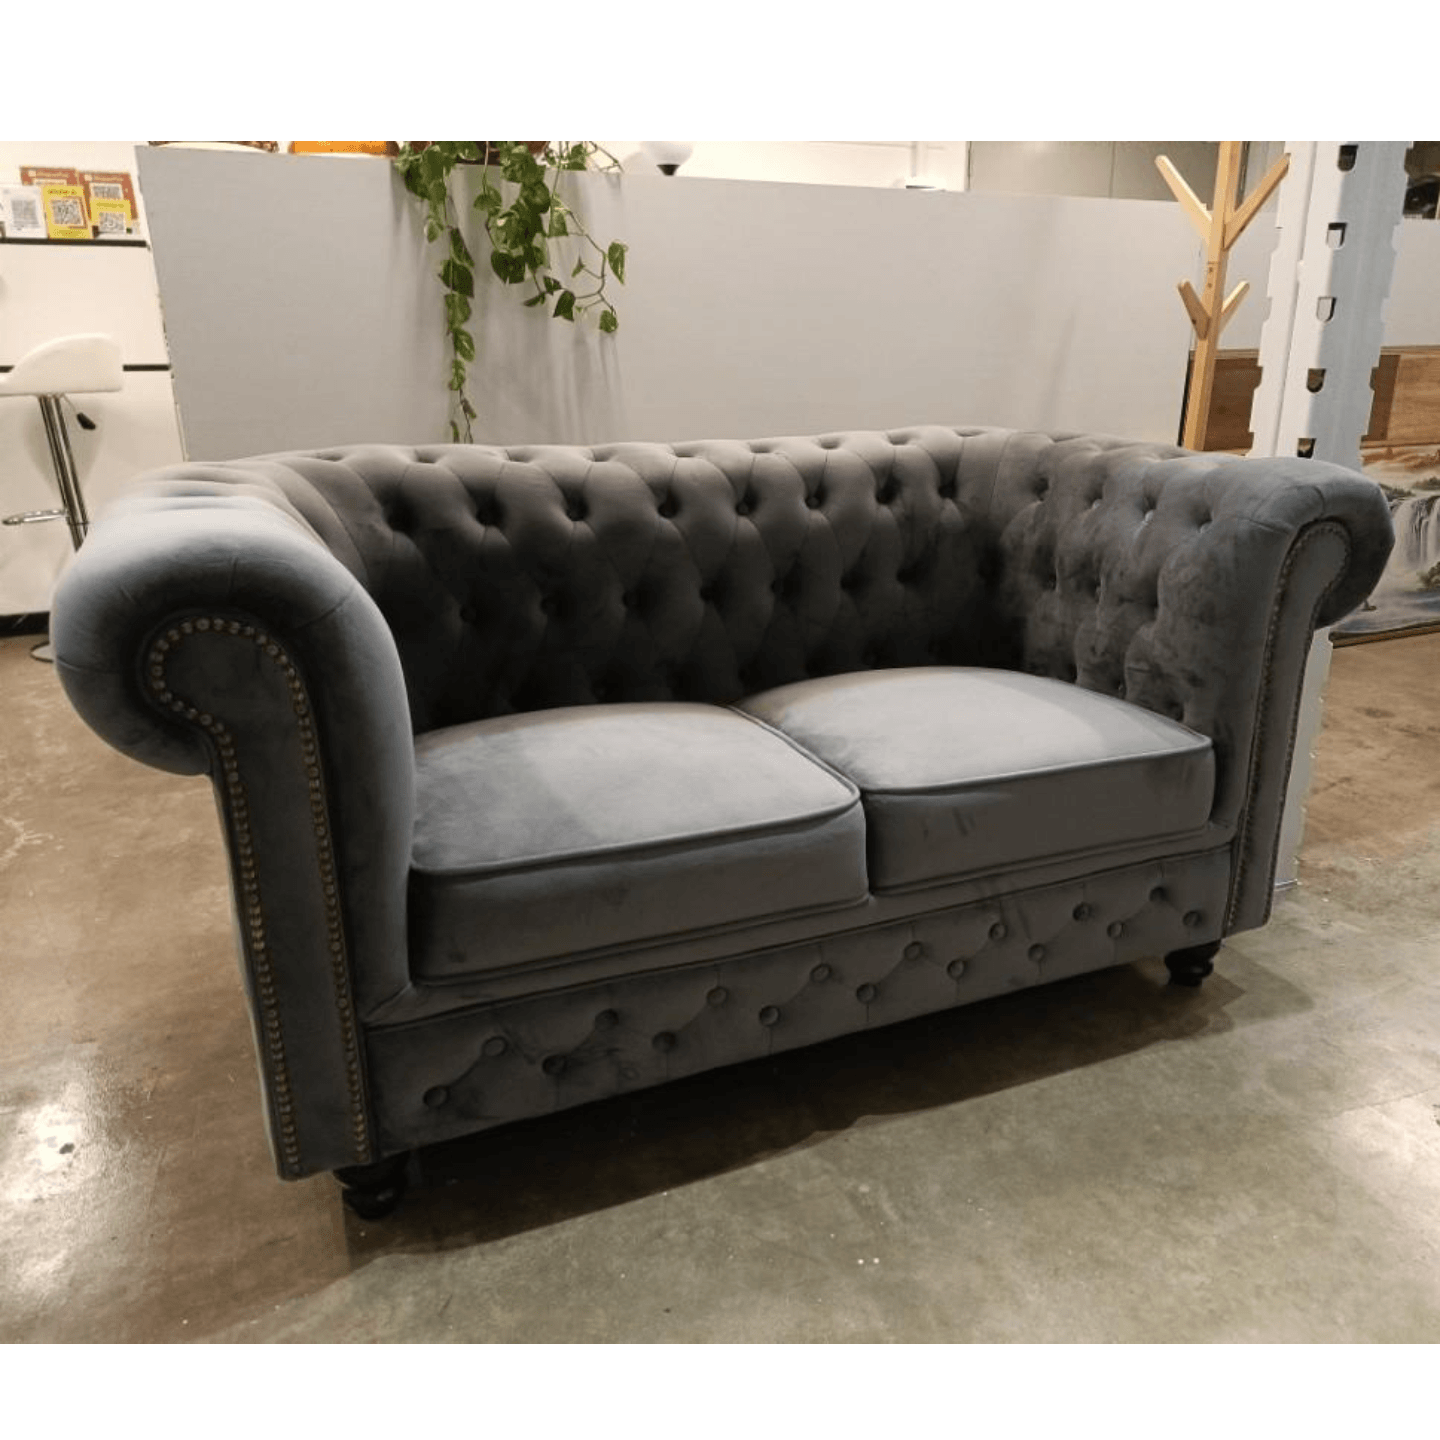 SALVADORE X 2 Seater Chesterfield Sofa in STORM GREY VELVET